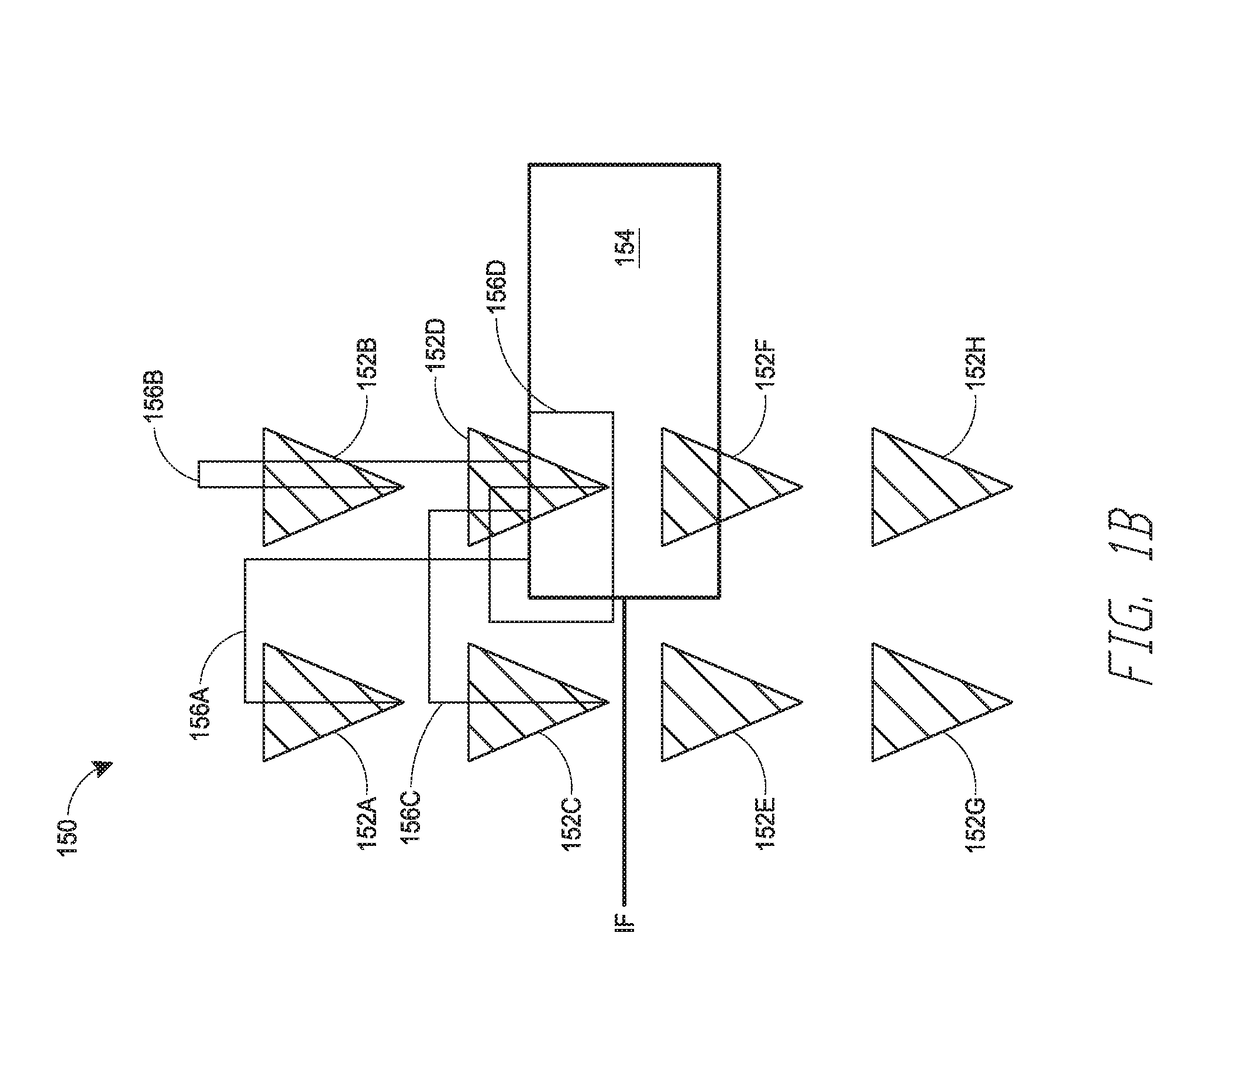 Antenna array calibration systems and methods